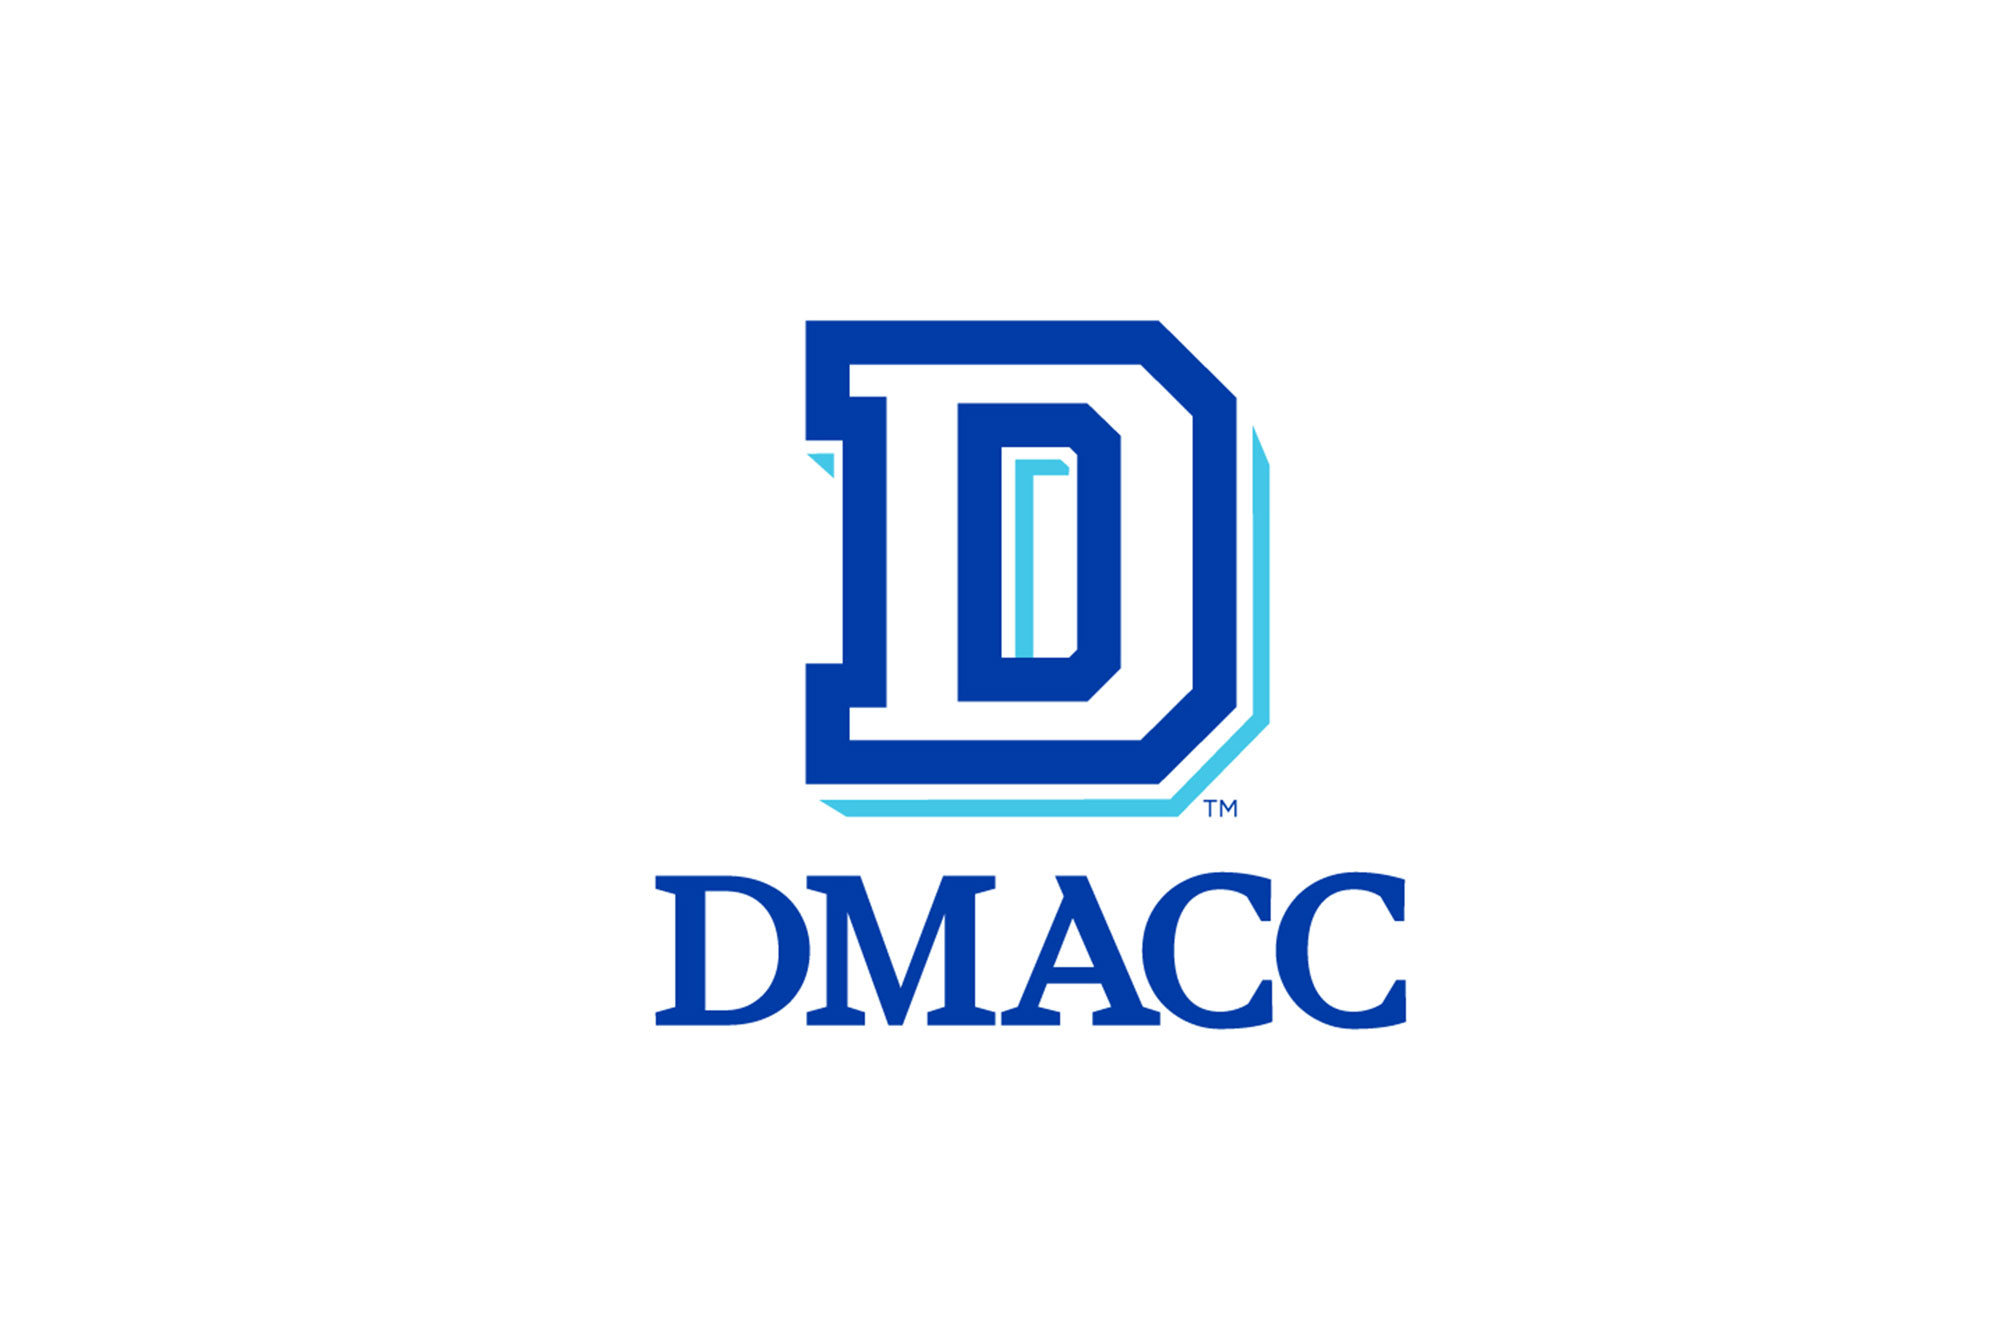 All of the employees have served in different roles at DMACC.